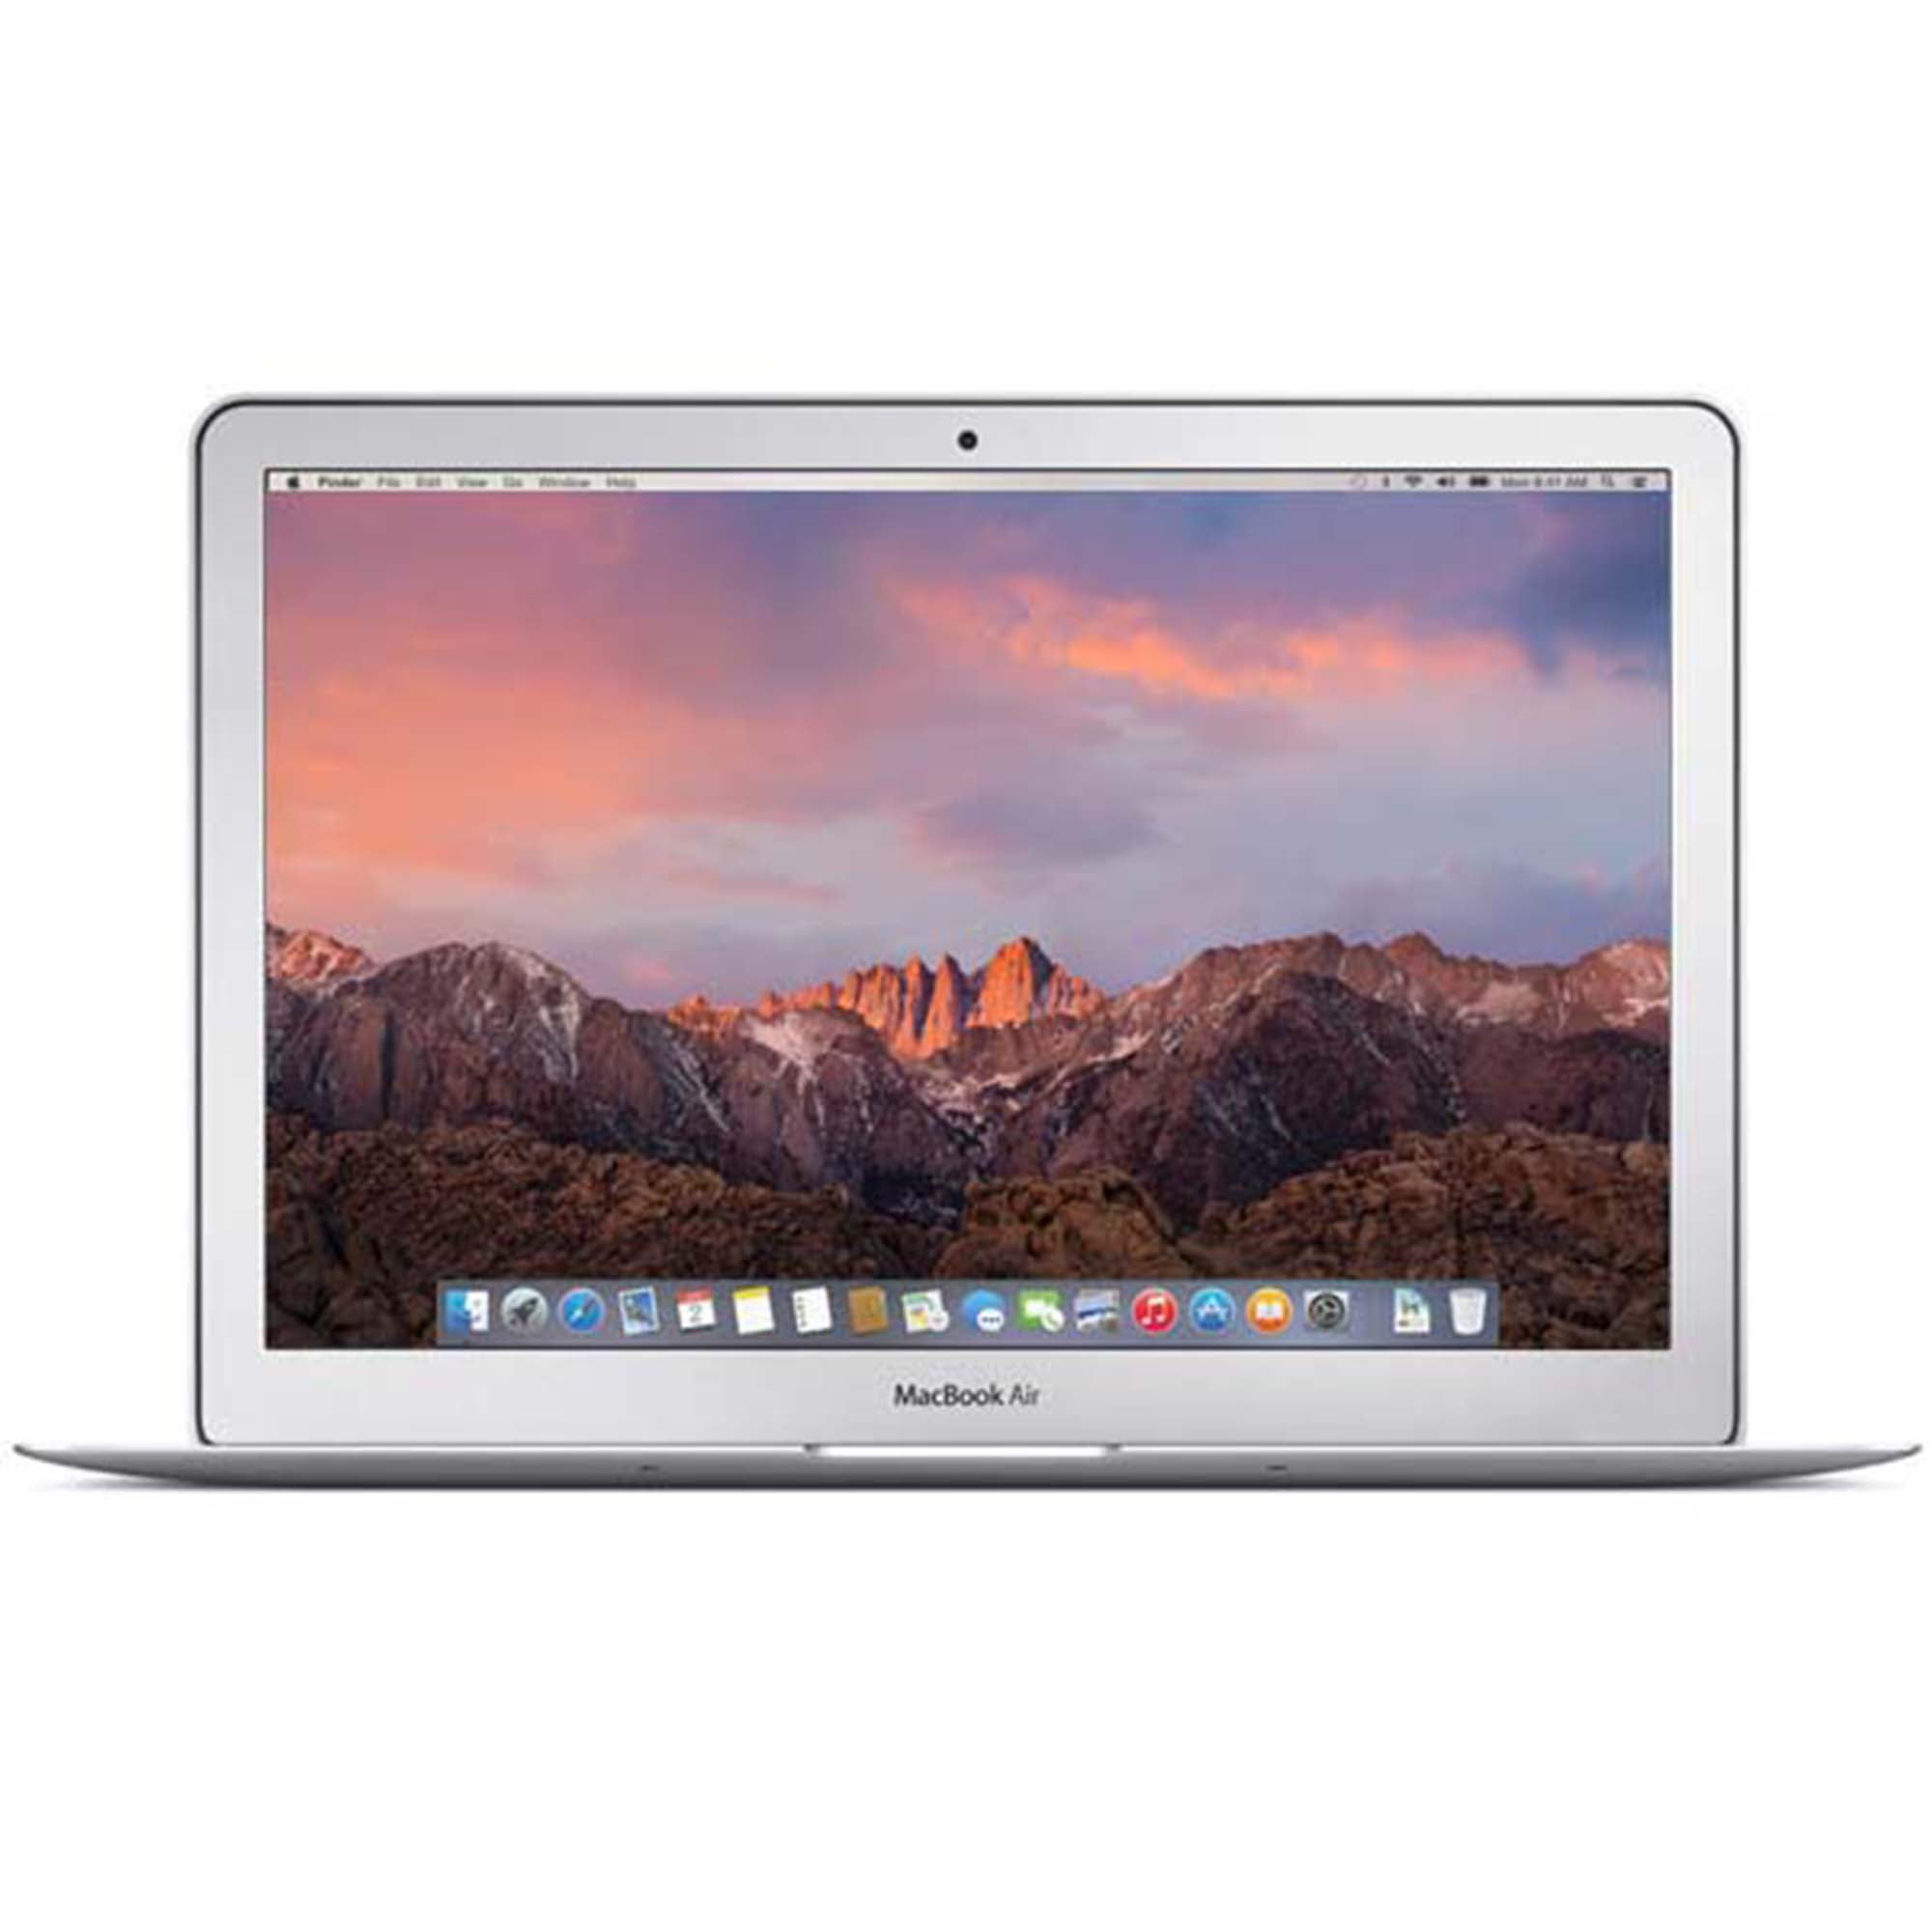 Buy 13 Apple MacBook Air 2.0GHz Dual Core i7 8GB Memory 256GB SSD Turbo  Boost to 3.2GHz - Used Online in Nepal. 550211186